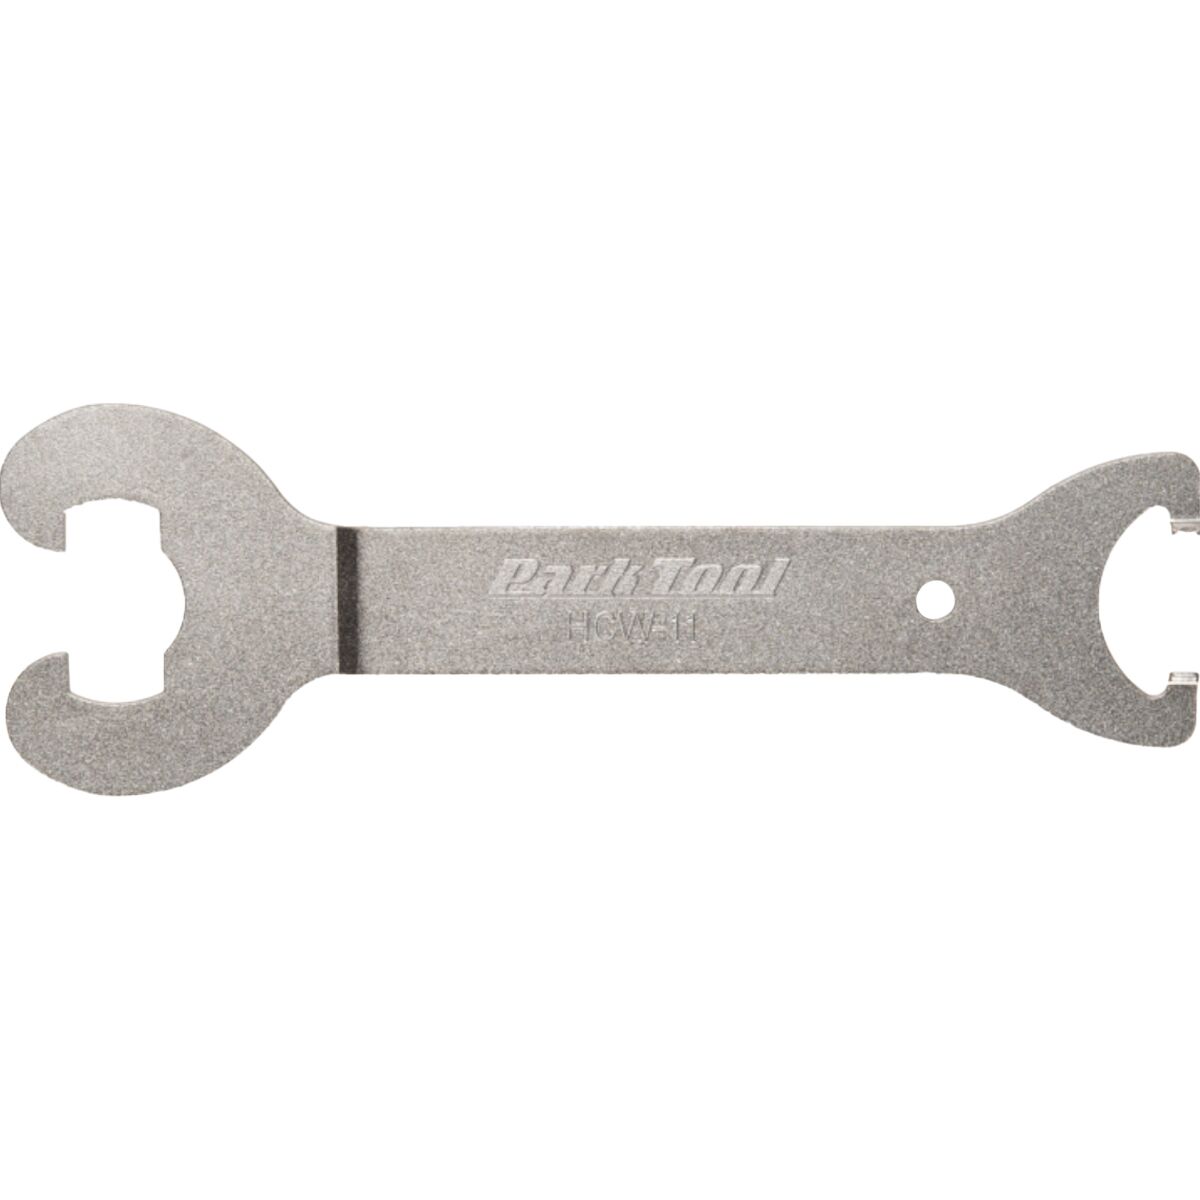 Park Tool Bottom Bracket Wrench One Color, HCW-11